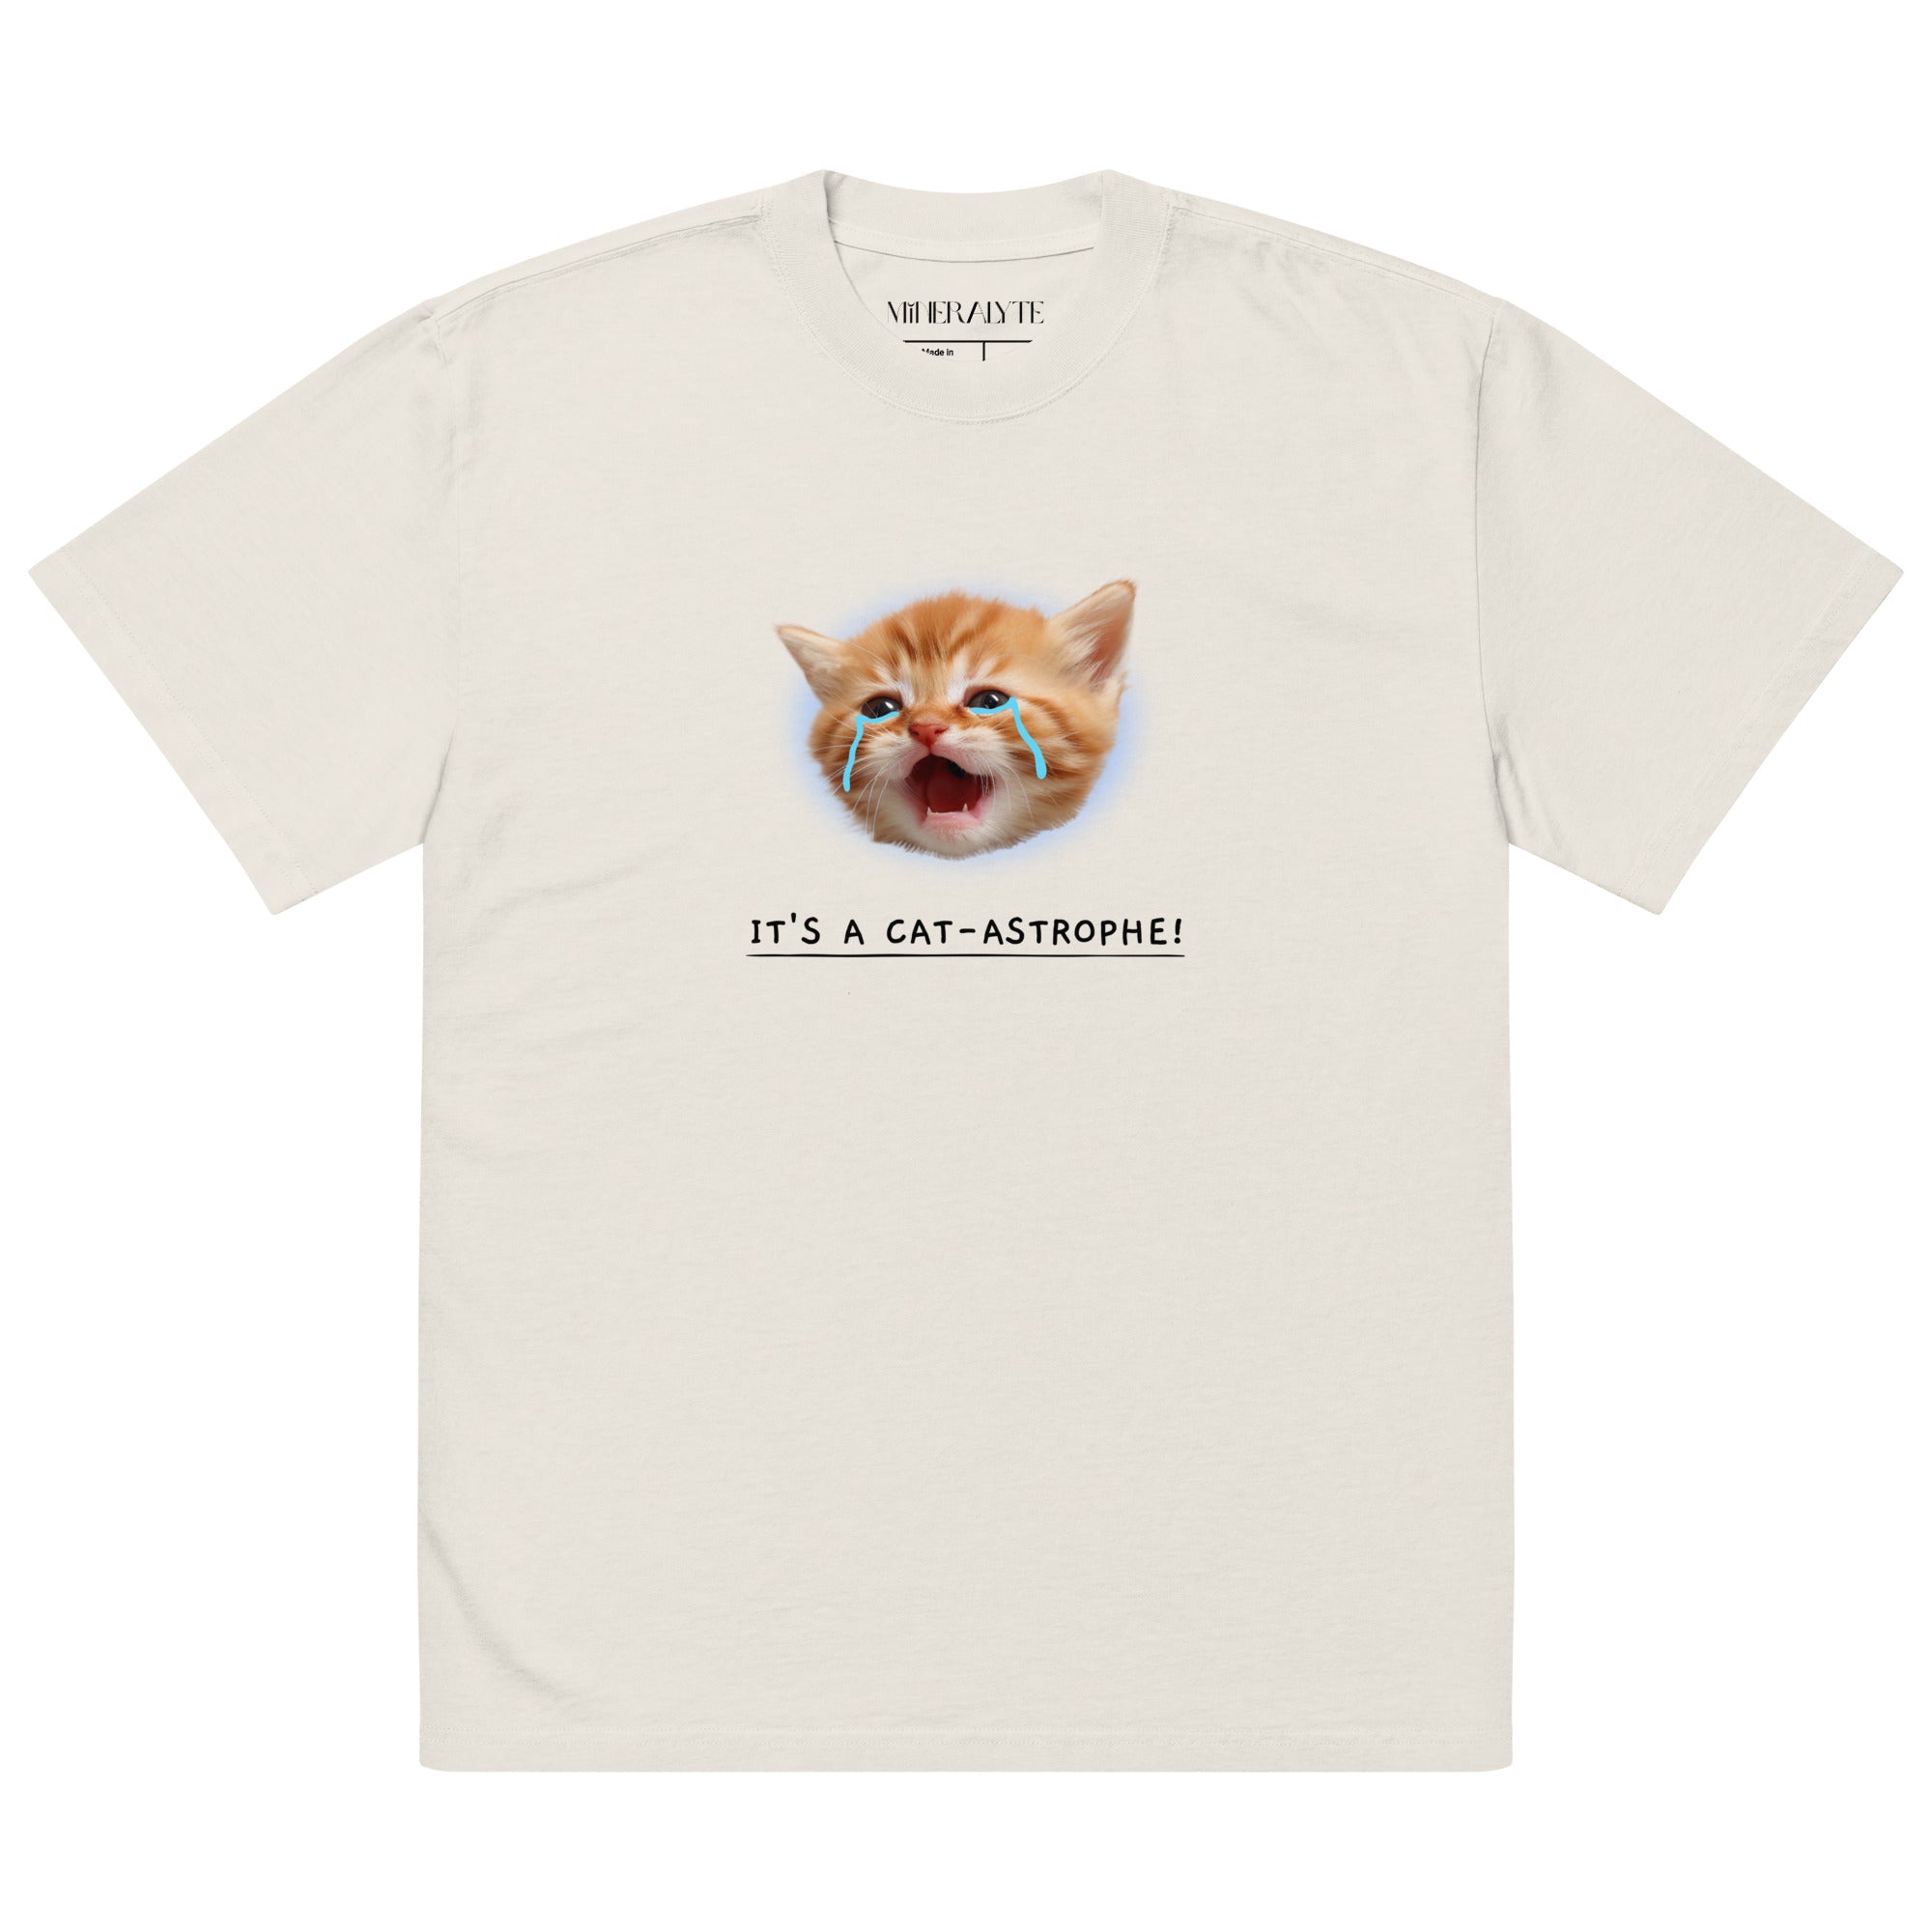 It's a Catastrophe Oversized Tee - Time's Reel